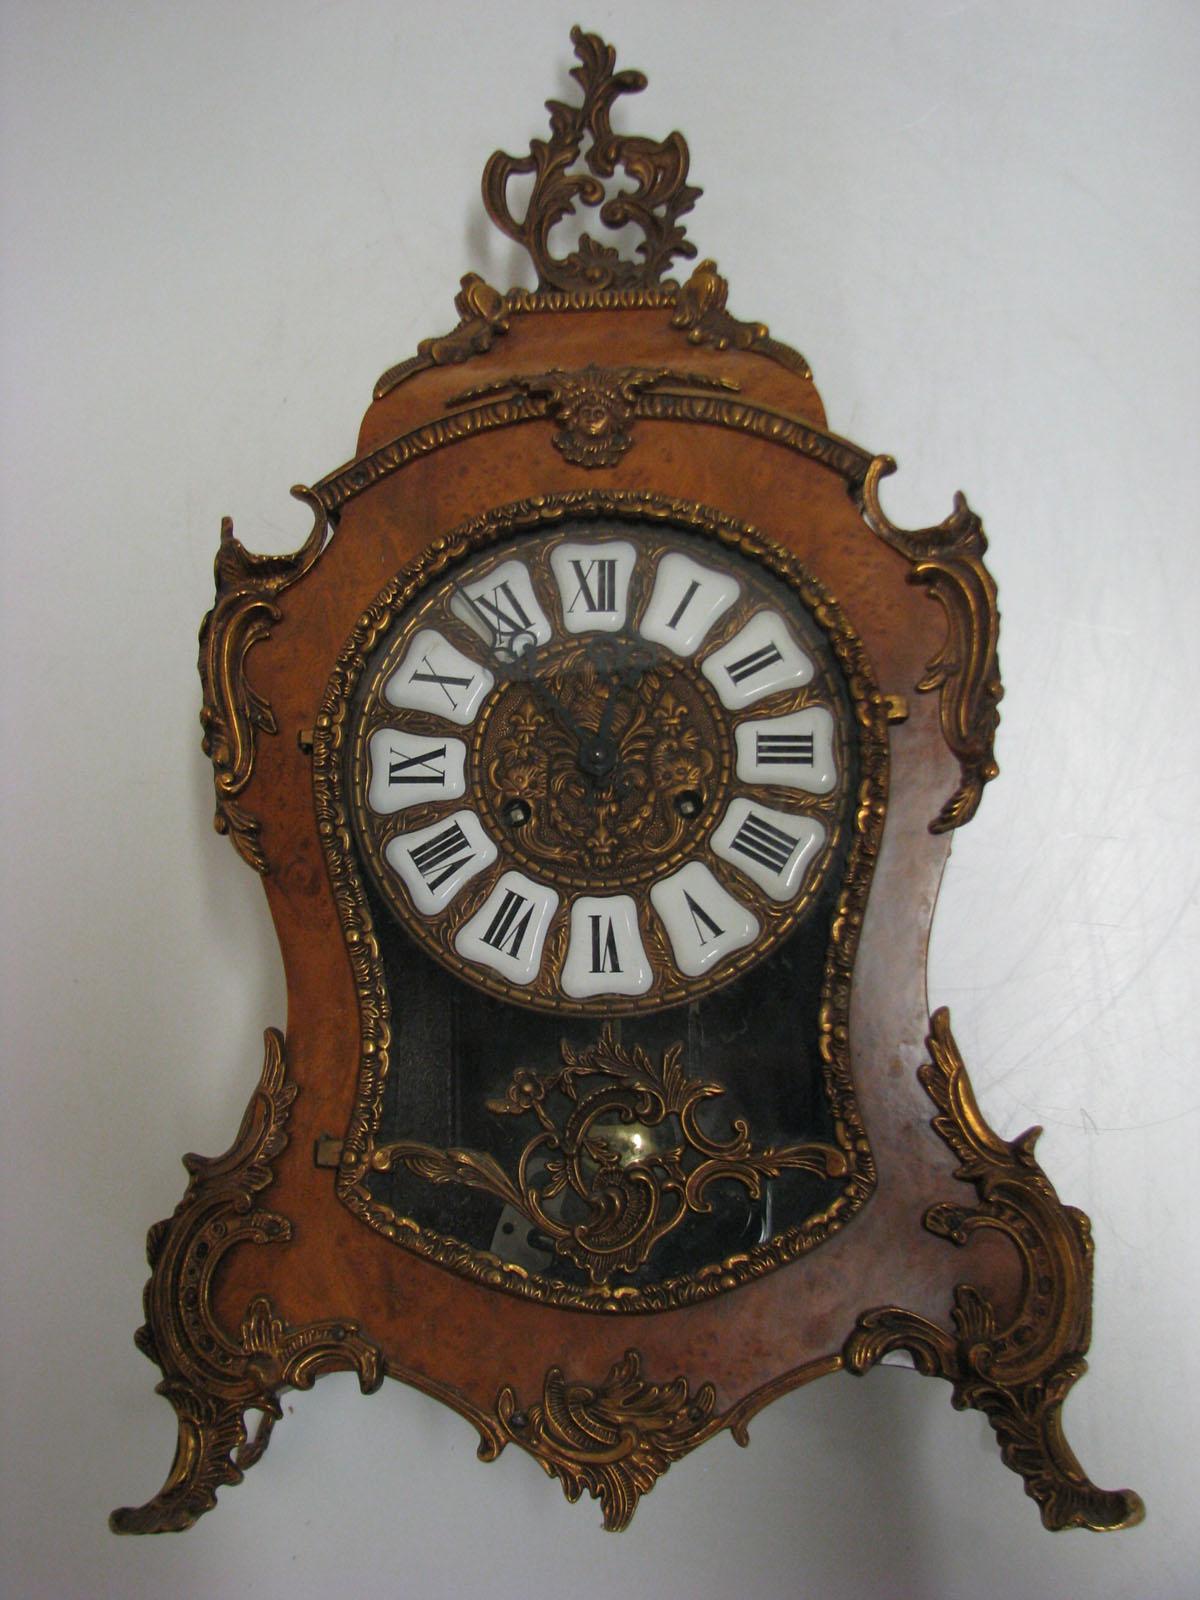 Mantel clock type Boulle, replica
Over a half-meter high mantel clock type Boulle
- a decorative replica, decorated with Walnut burl and metal fittings.
 
Grateful visually and fully usable.
German mechanism 